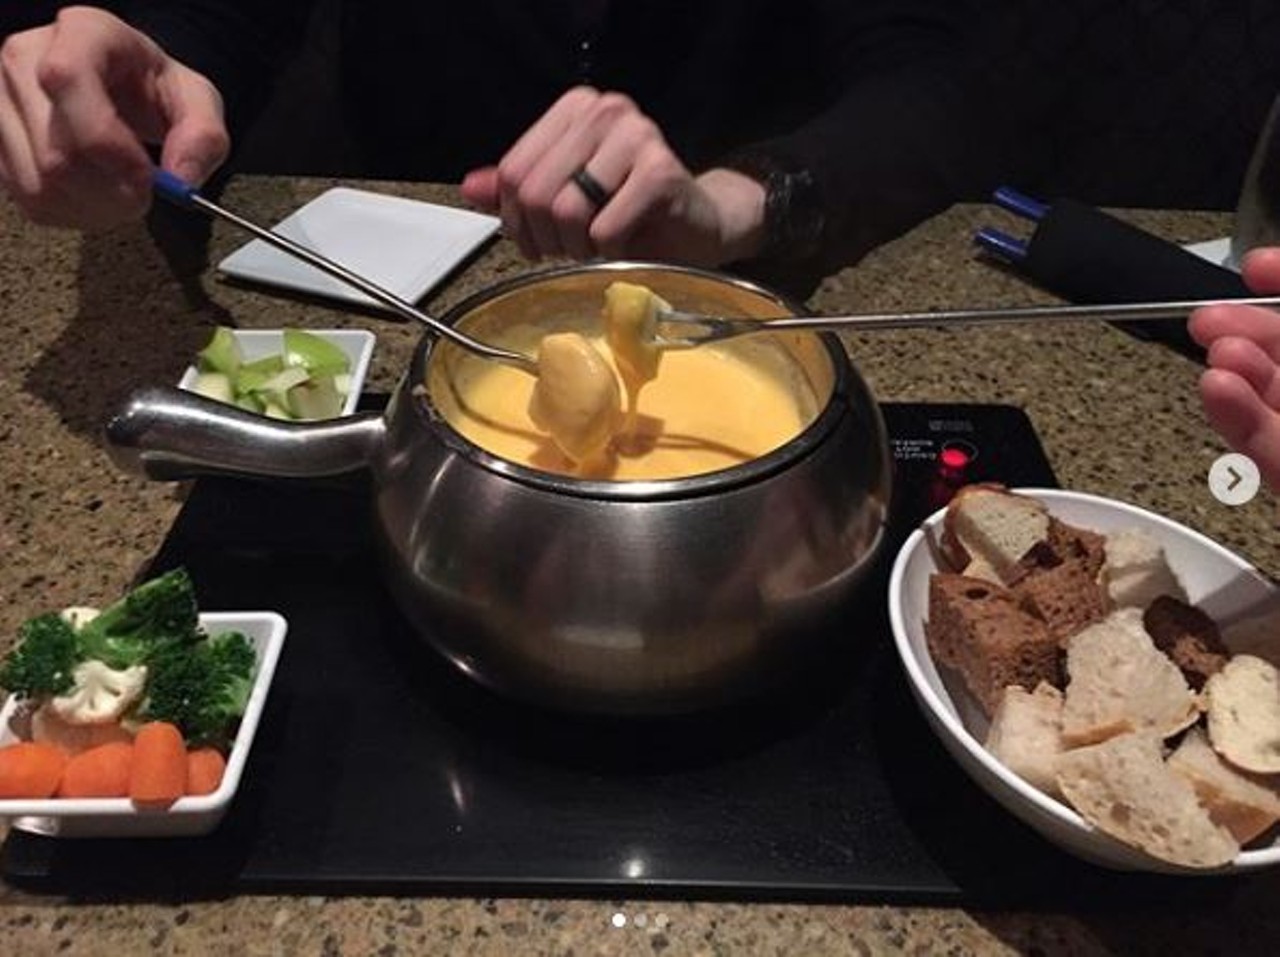 FONDUE
The Melting Pot
6683 Delmar Boulevard; 314-725-4141
This is a St. Louis classic for a reason. The Melting Pot serves you a big bowl of melted cheese that you can dip things in, but you'll want to just drink it with a straw.
Photo courtesy of hayhailyriane / Instagram